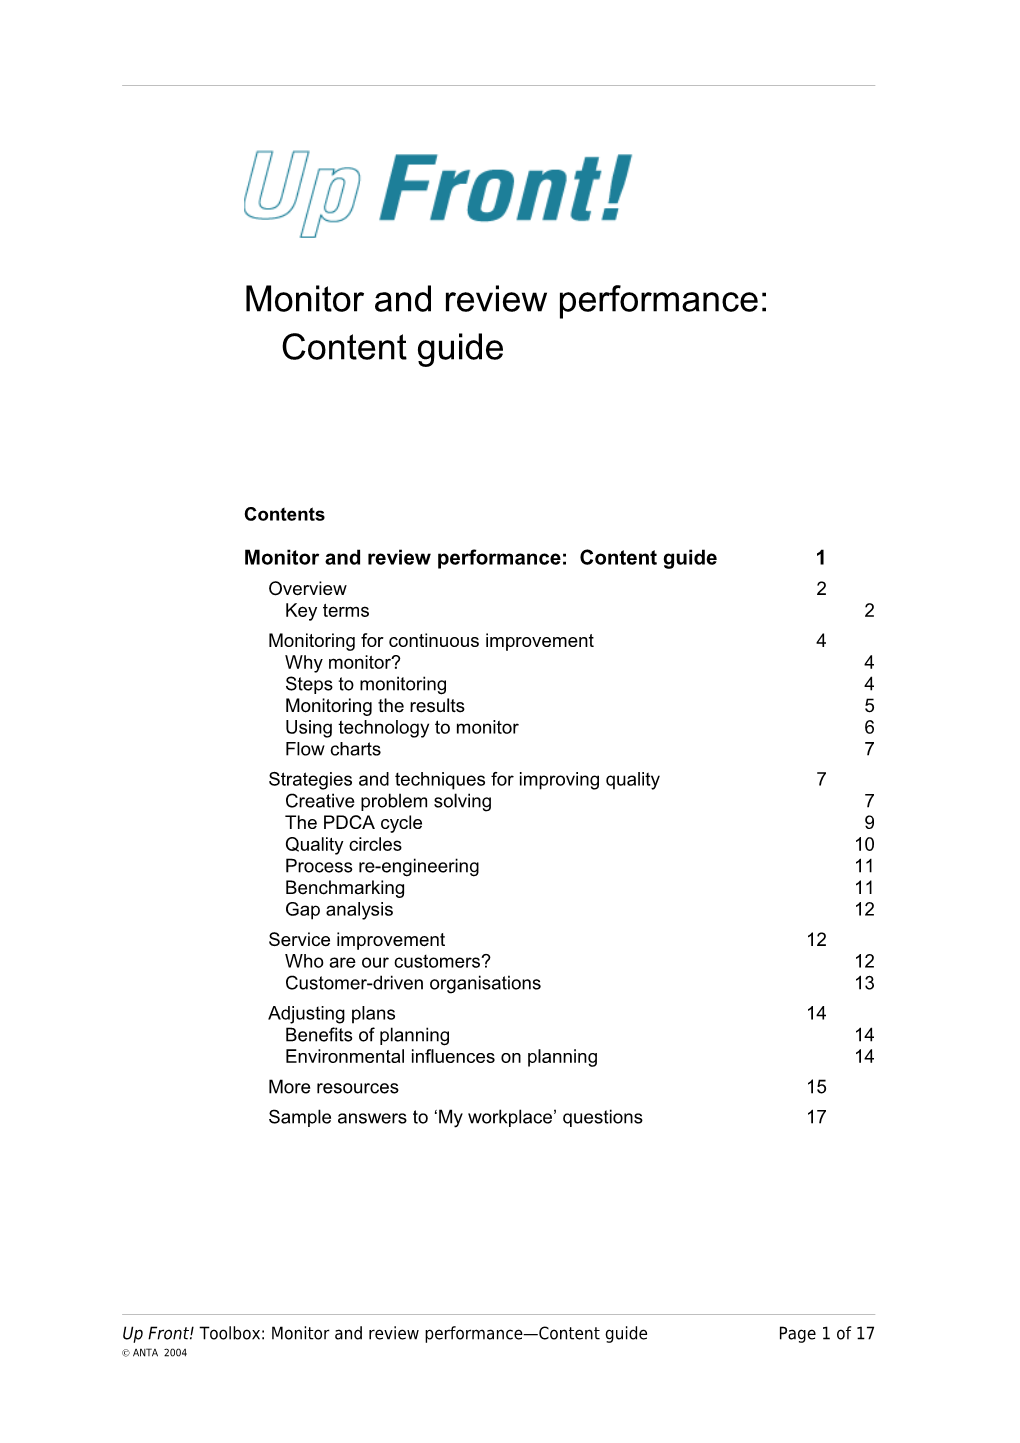 Monitor and Review Performance Content Guide